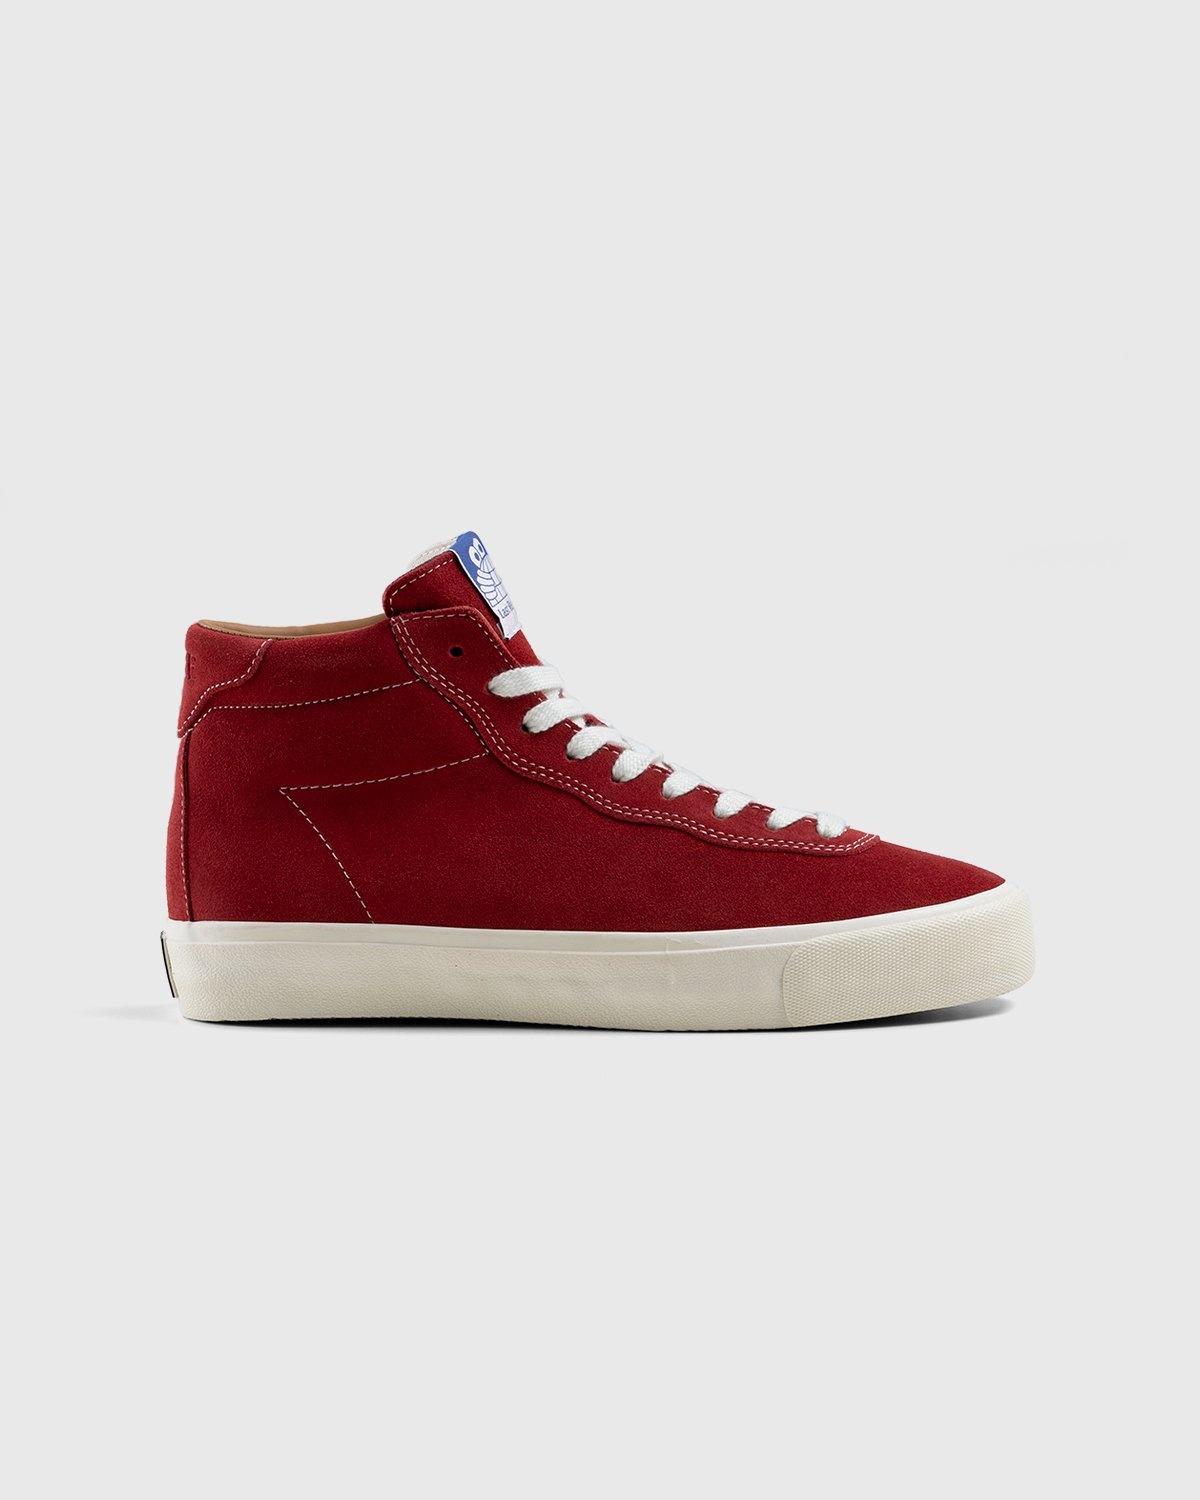 Last Resort AB – VM001 Hi Suede Old Red/White - High Top Sneakers - Red - Image 1